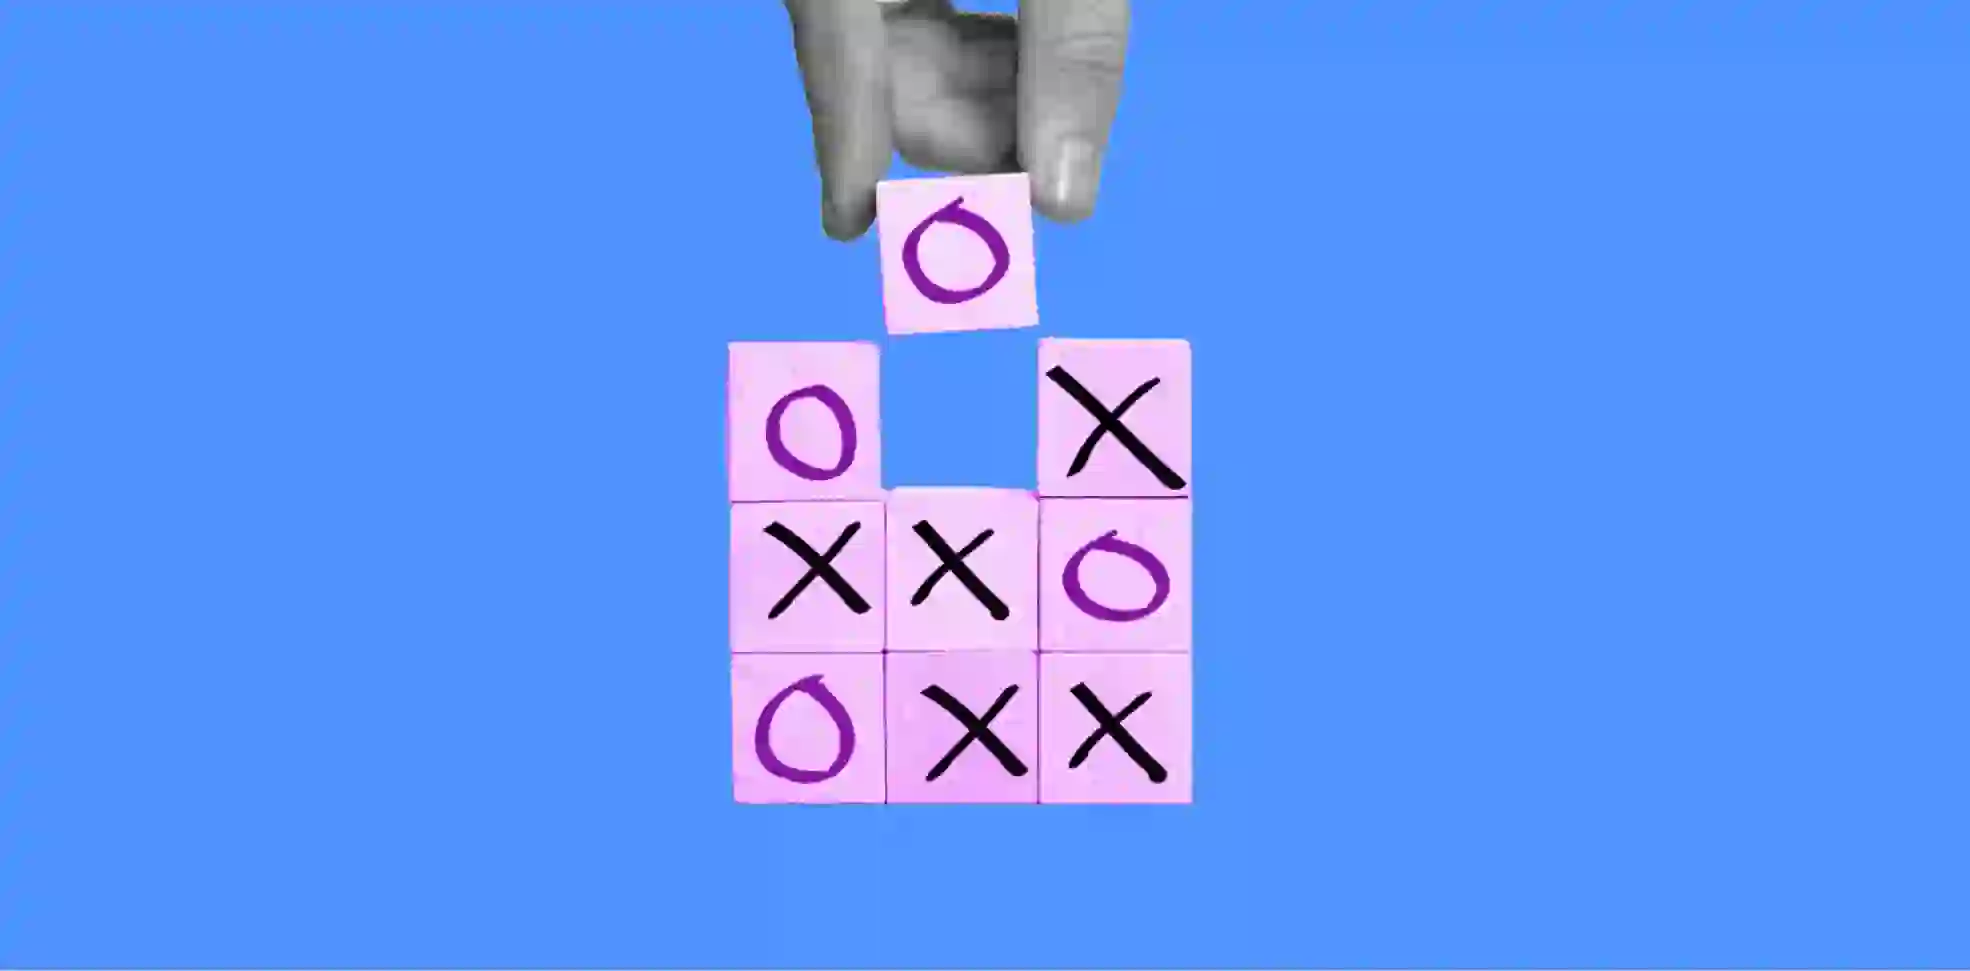 tic-tac-toe cubes on a blue background